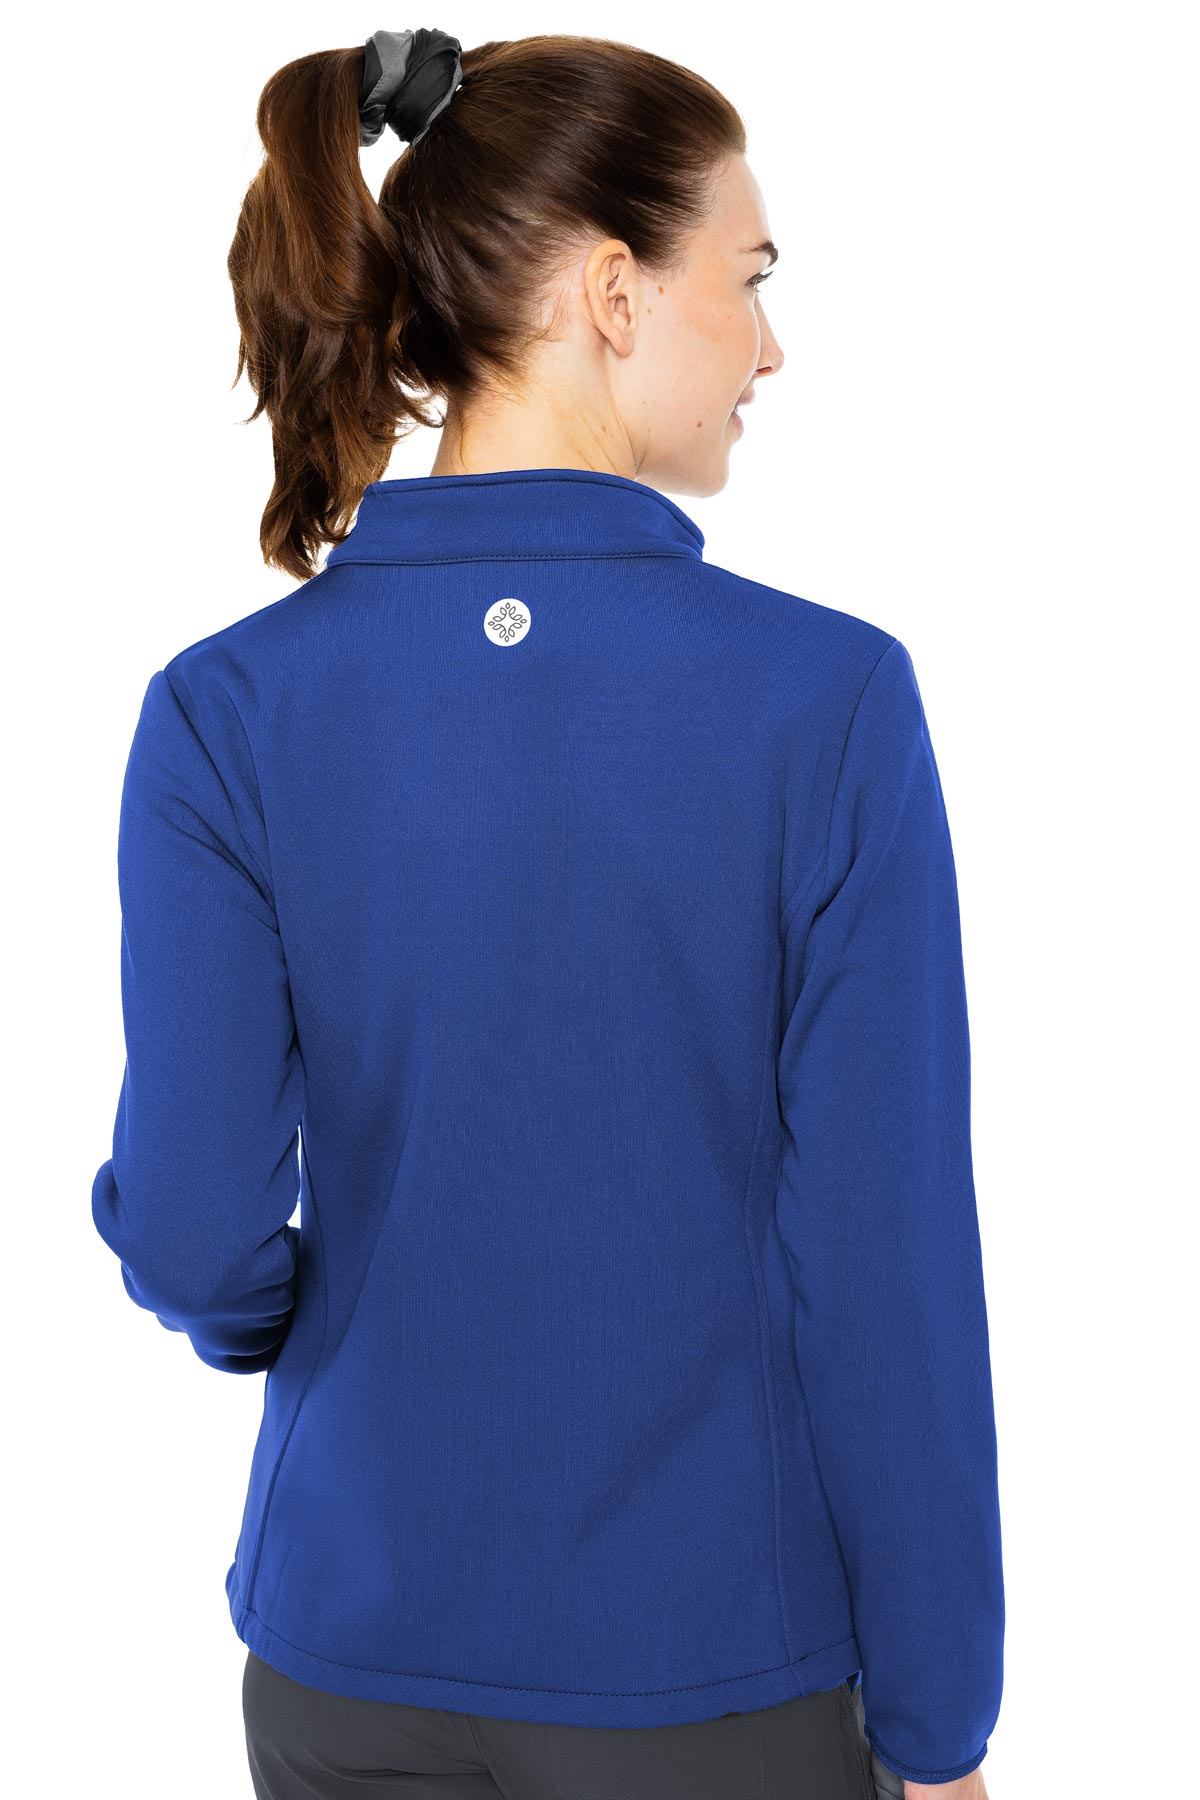 MED COUTURE Performance Fleece Jacket